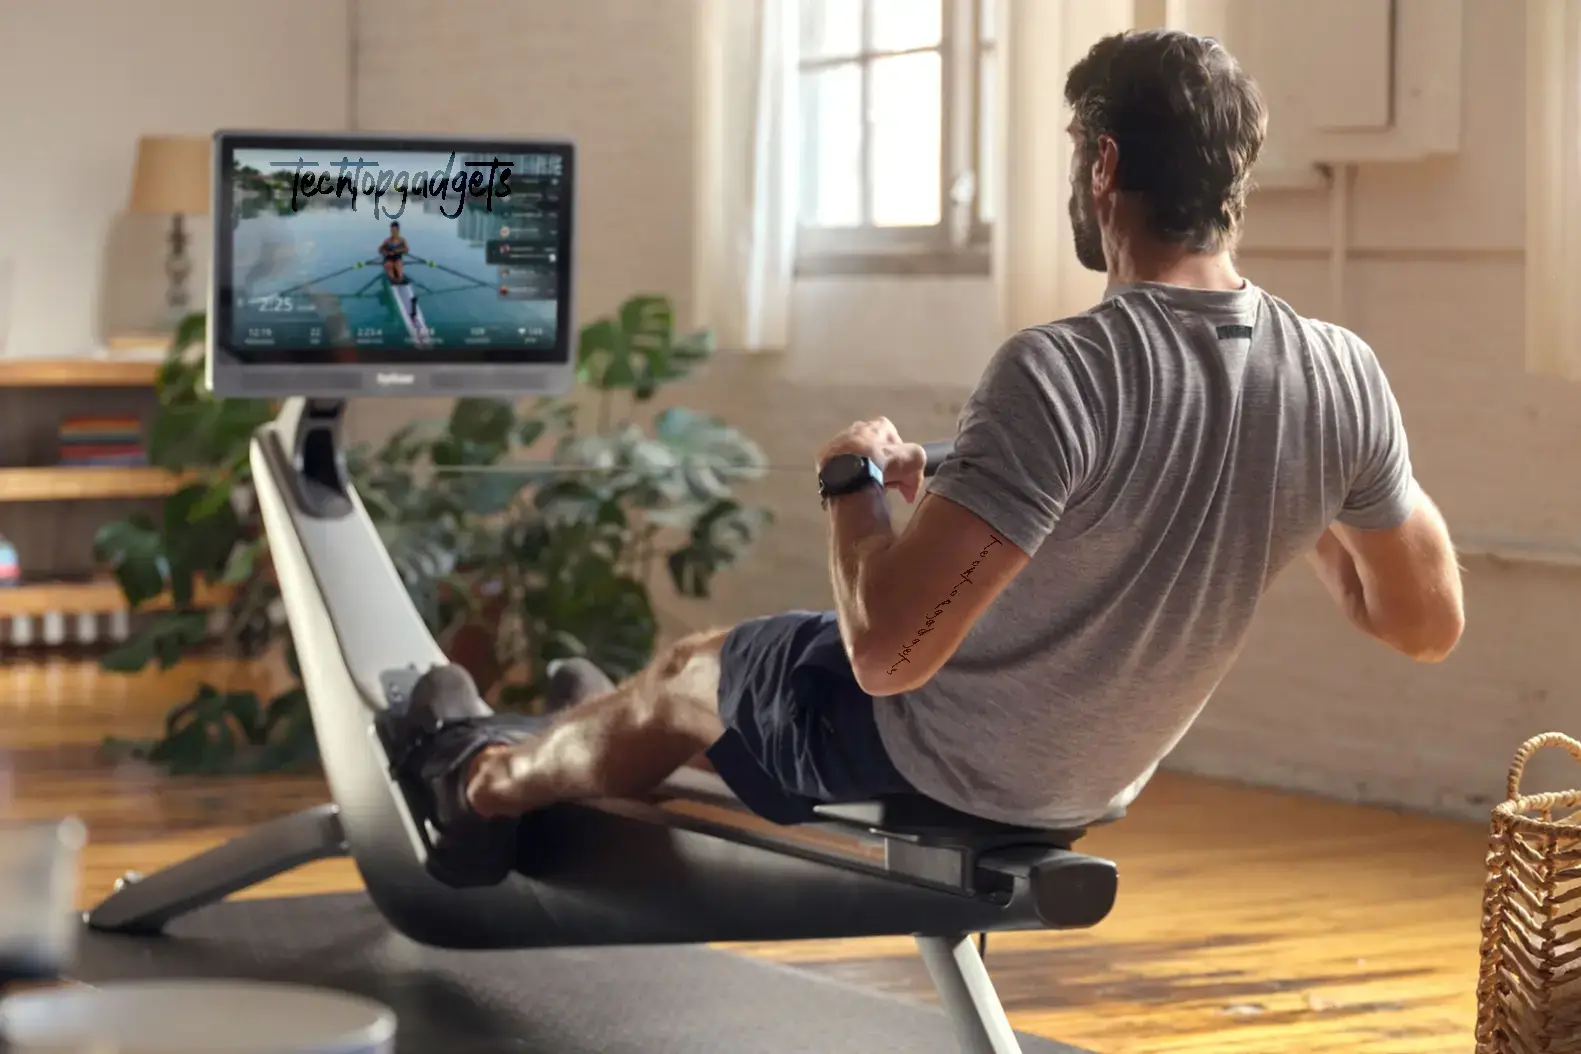 Captured in a homely setting, a user engages with the best rated home rowing machine, providing an ergonomic and efficient workout from the comfort of home.